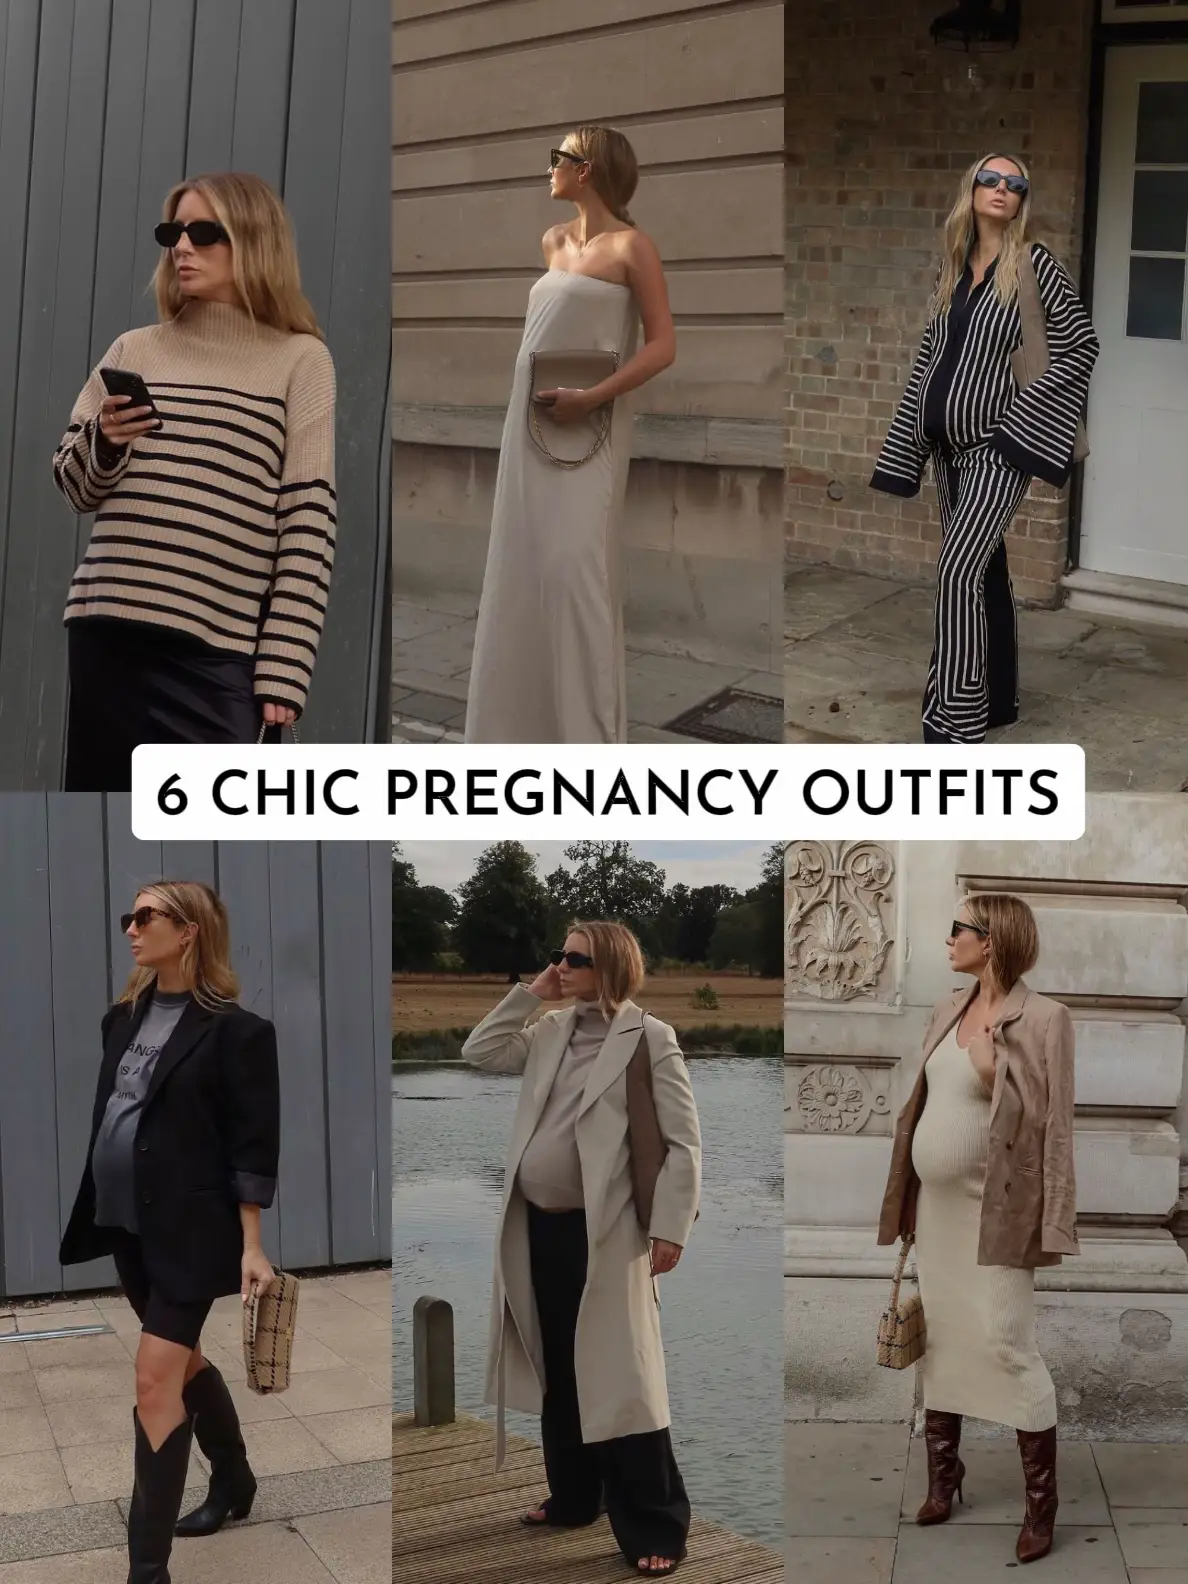 6 CHIC PREGNANCY OUTFITS, Gallery posted by Jessicaharris